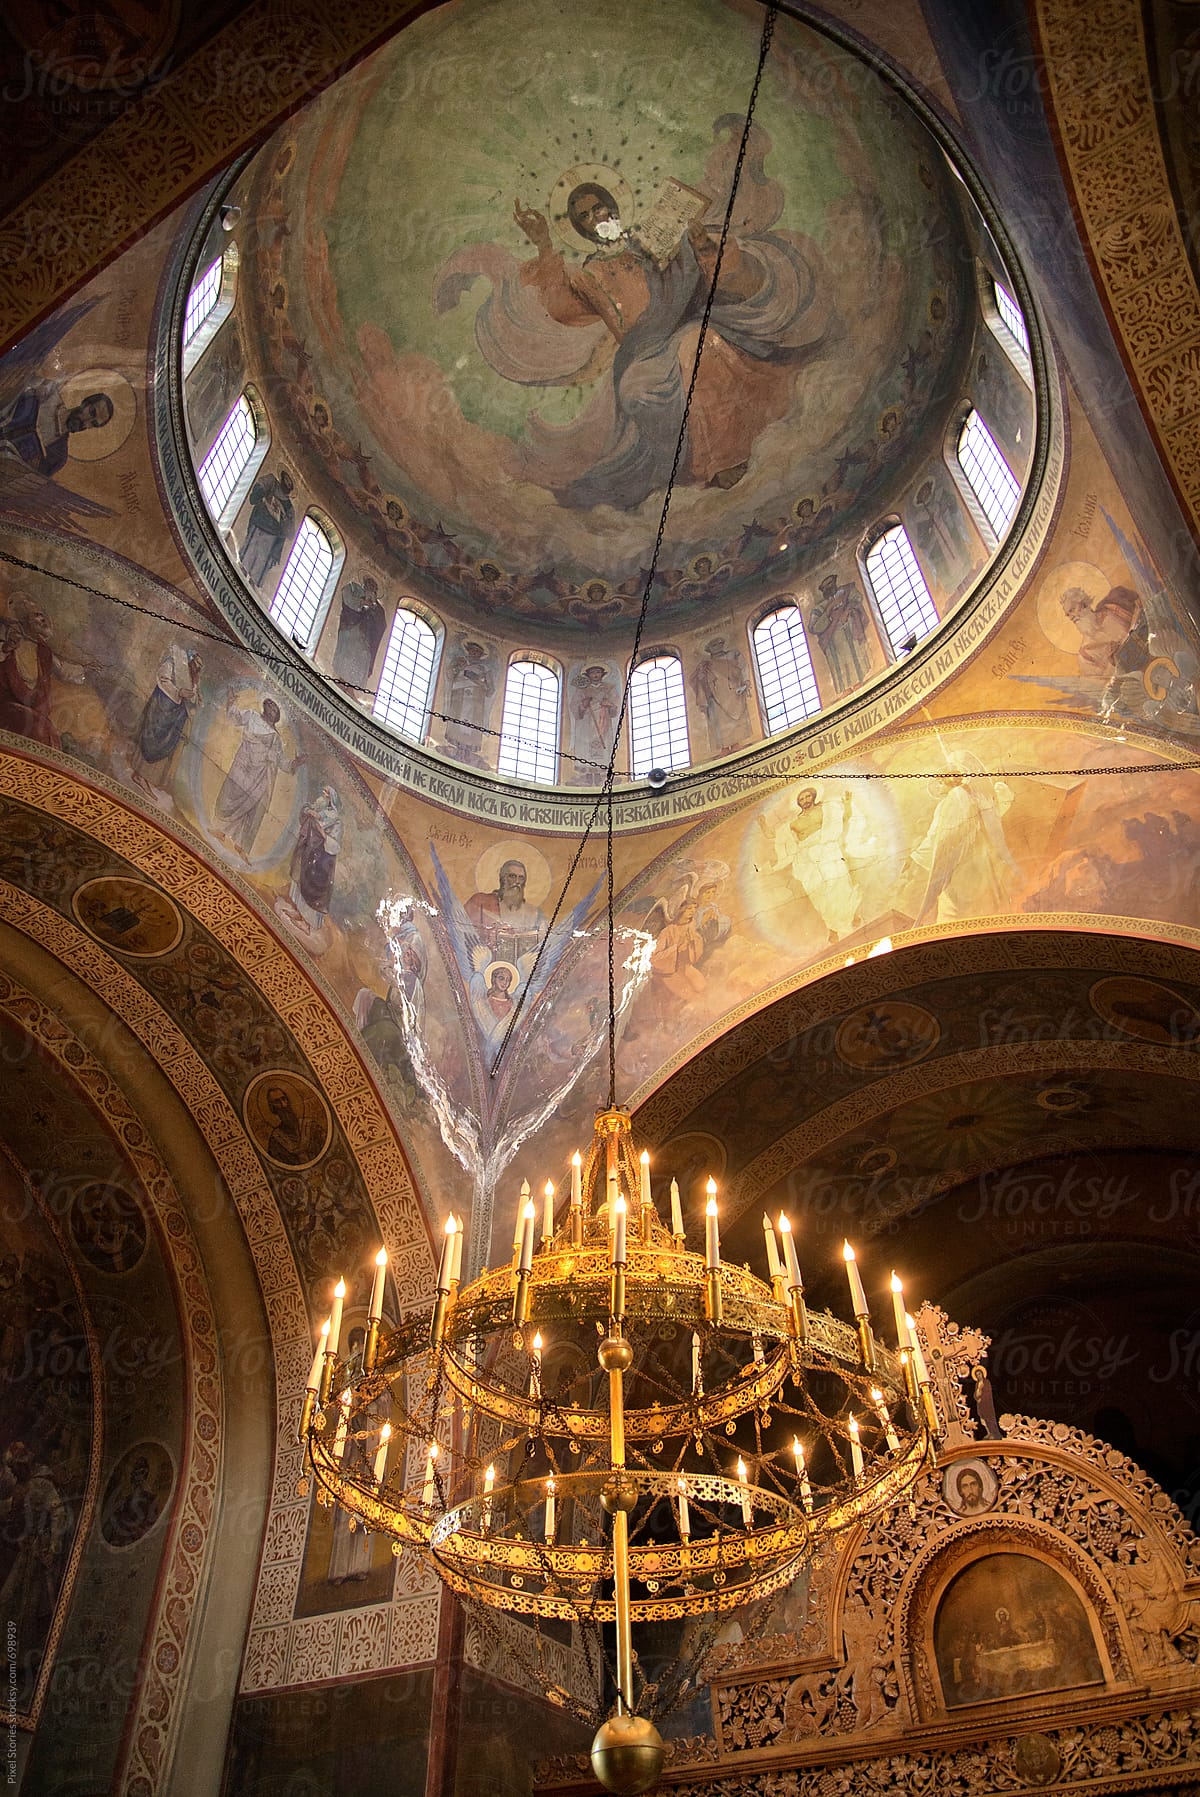 Old Orthodox church dome depicting an icon of Christ.